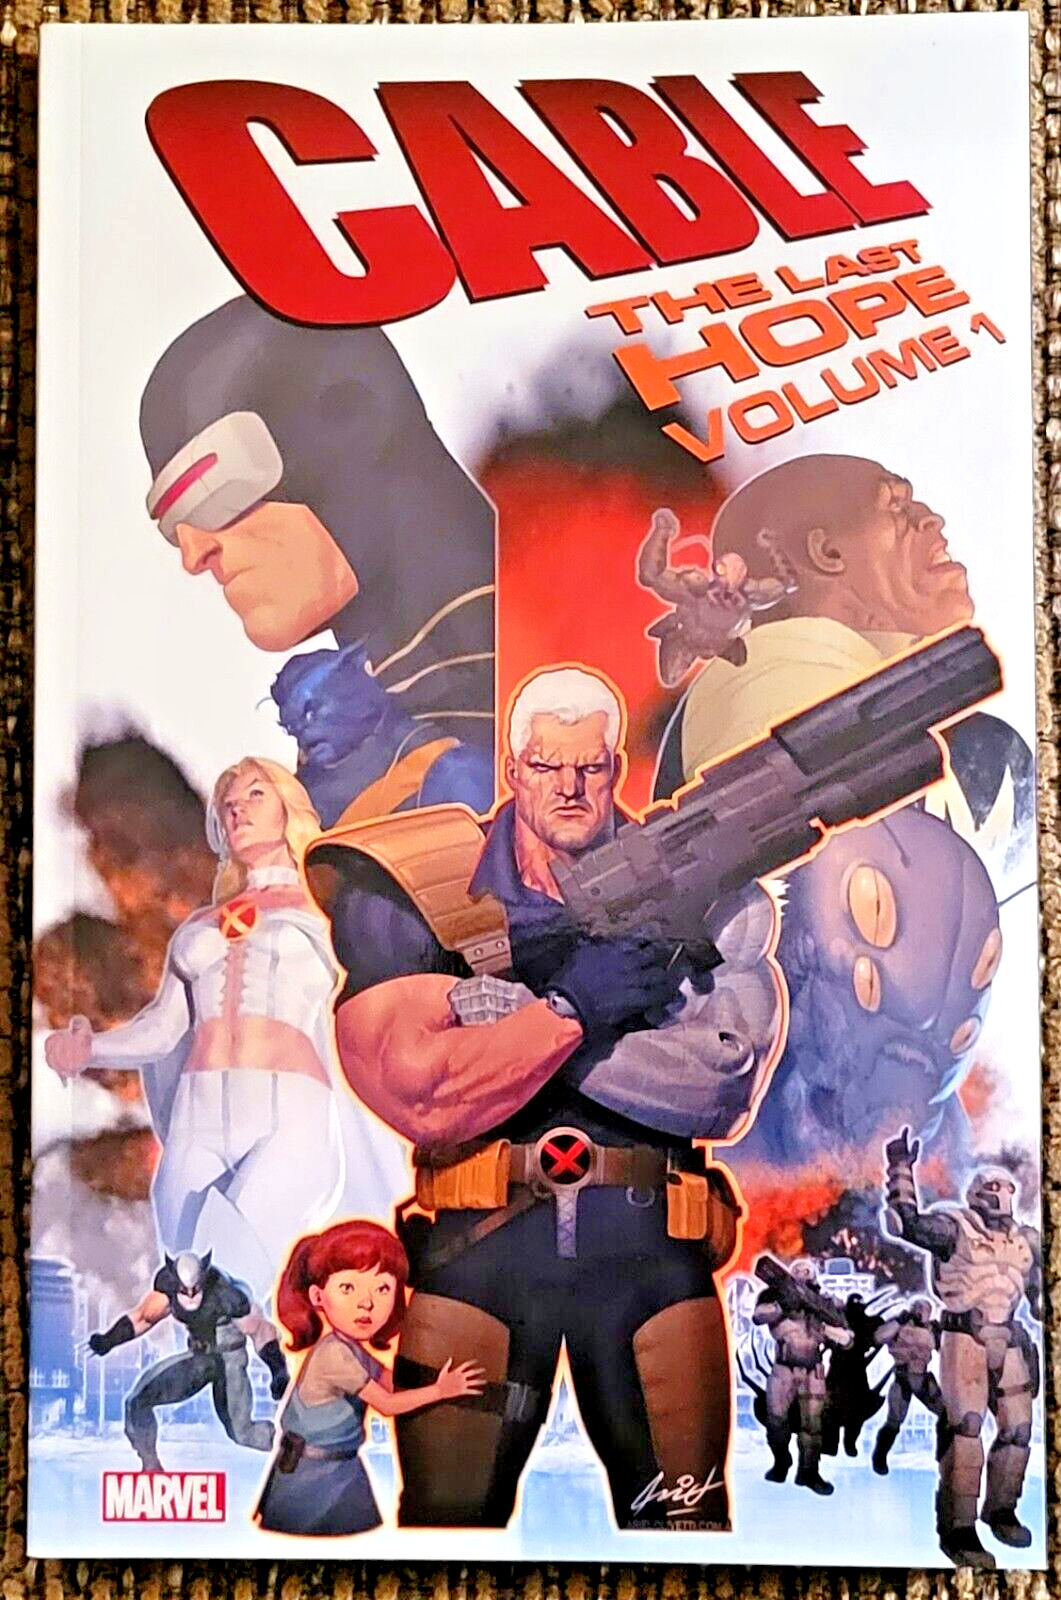 CABLE: THE LAST HOPE VOLUME 1 TPB GRAPHIC NOVEL MARVEL X-MEN X-FORCE - BRAND NEW